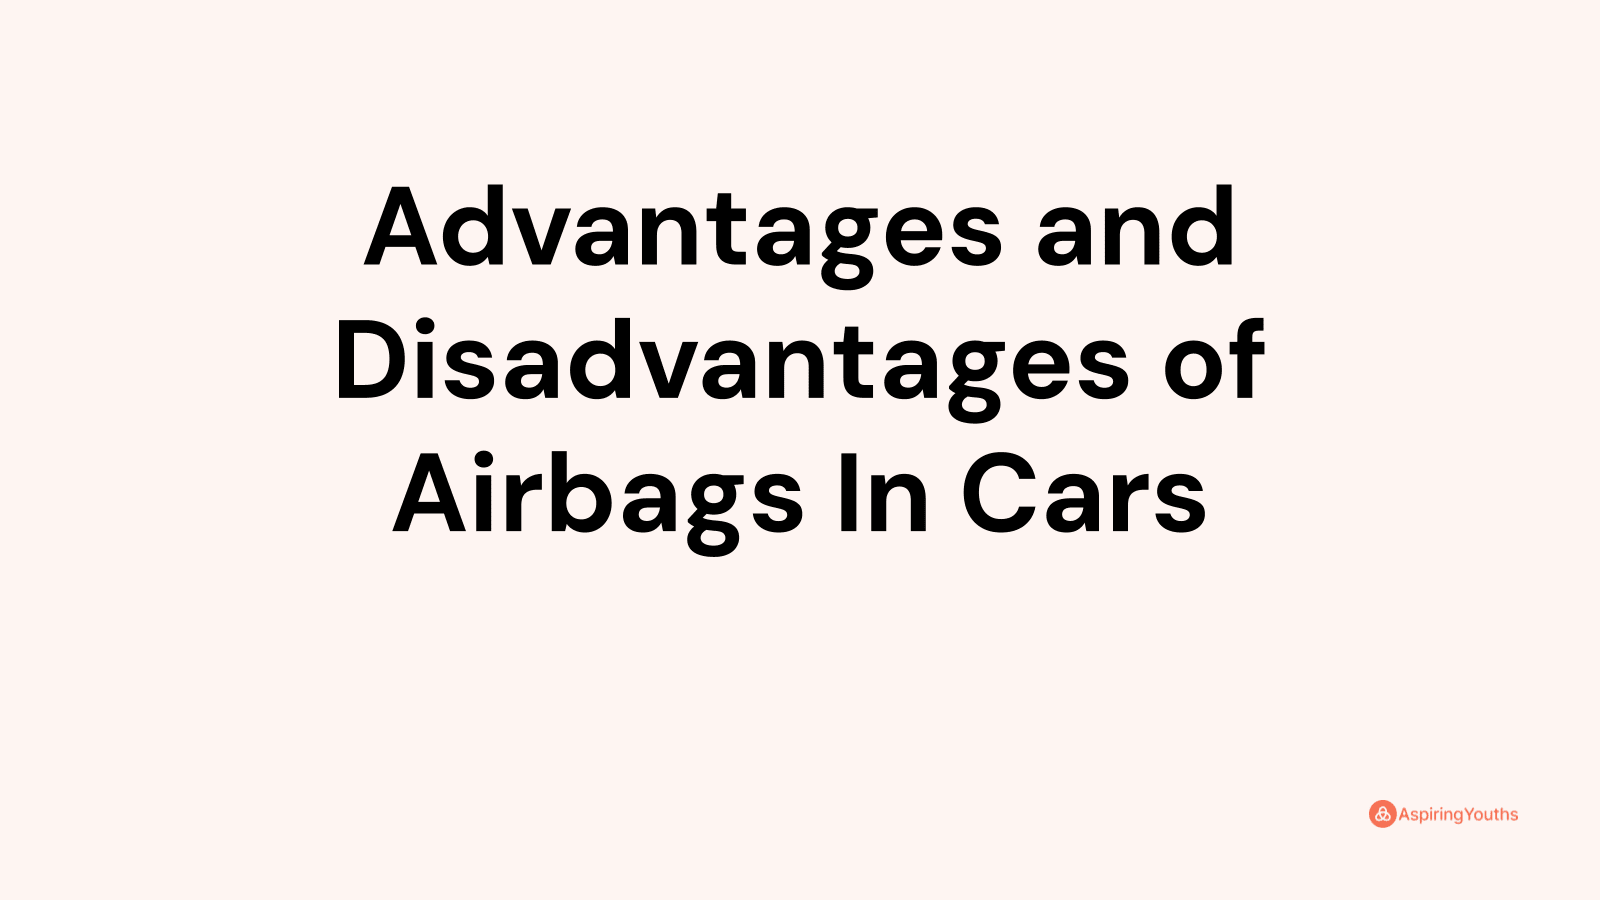 Advantages and disadvantages of Airbags In Cars